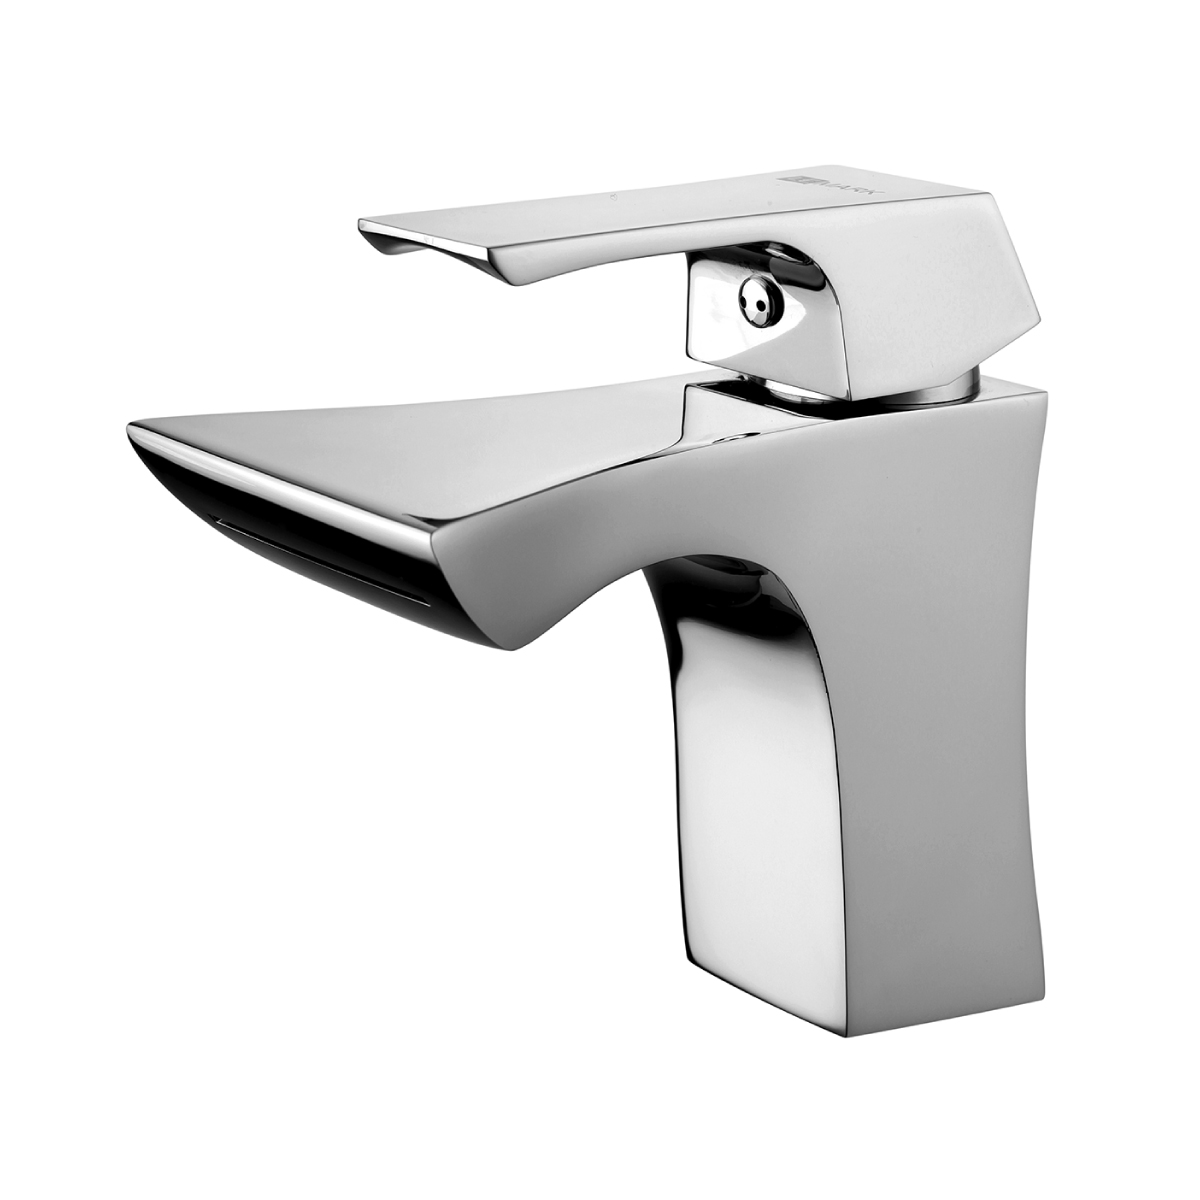 LM4546C Washbasin faucet
with waterfall spout